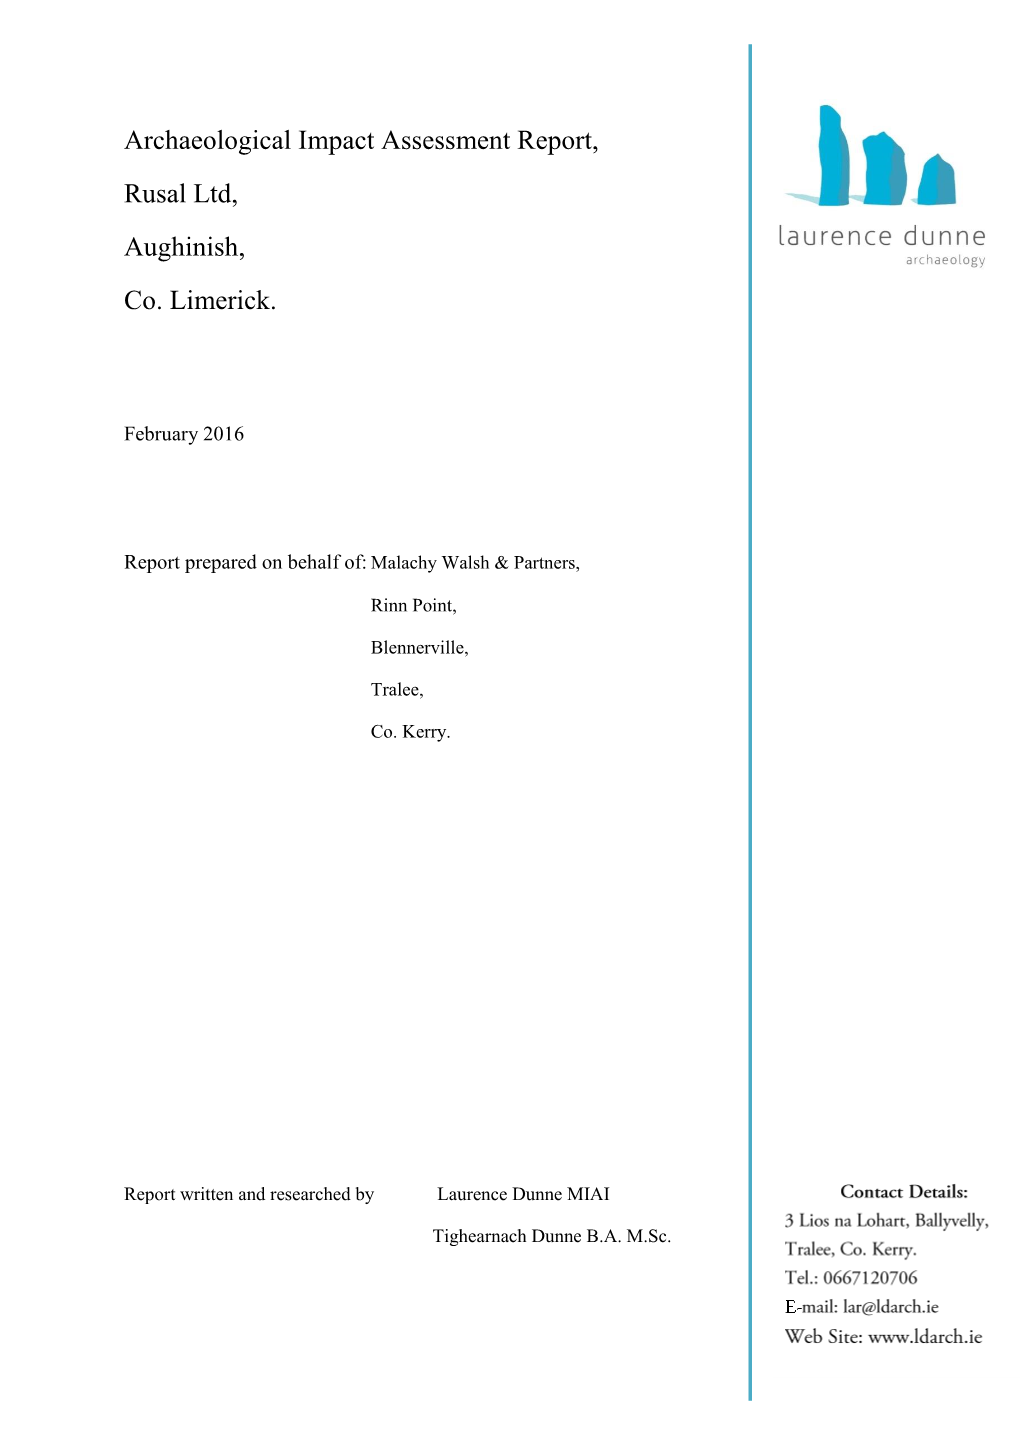 Archaeological Impact Assessment Report, Rusal Ltd, Aughinish, Co